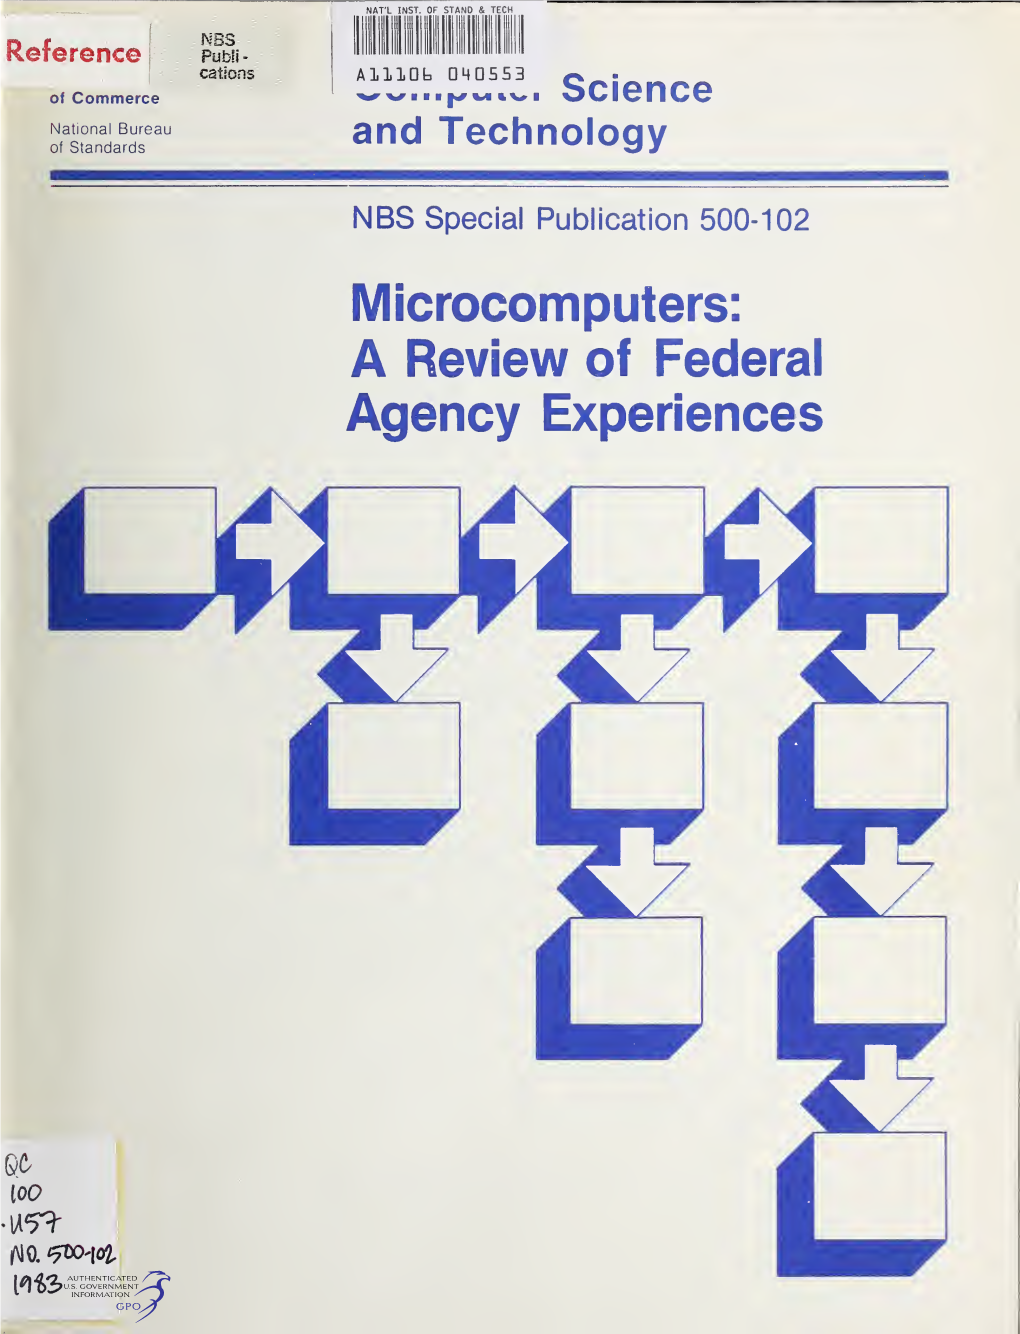 A Review of Federal Agency Experiences NATIONAL BUREAU of STANDARDS